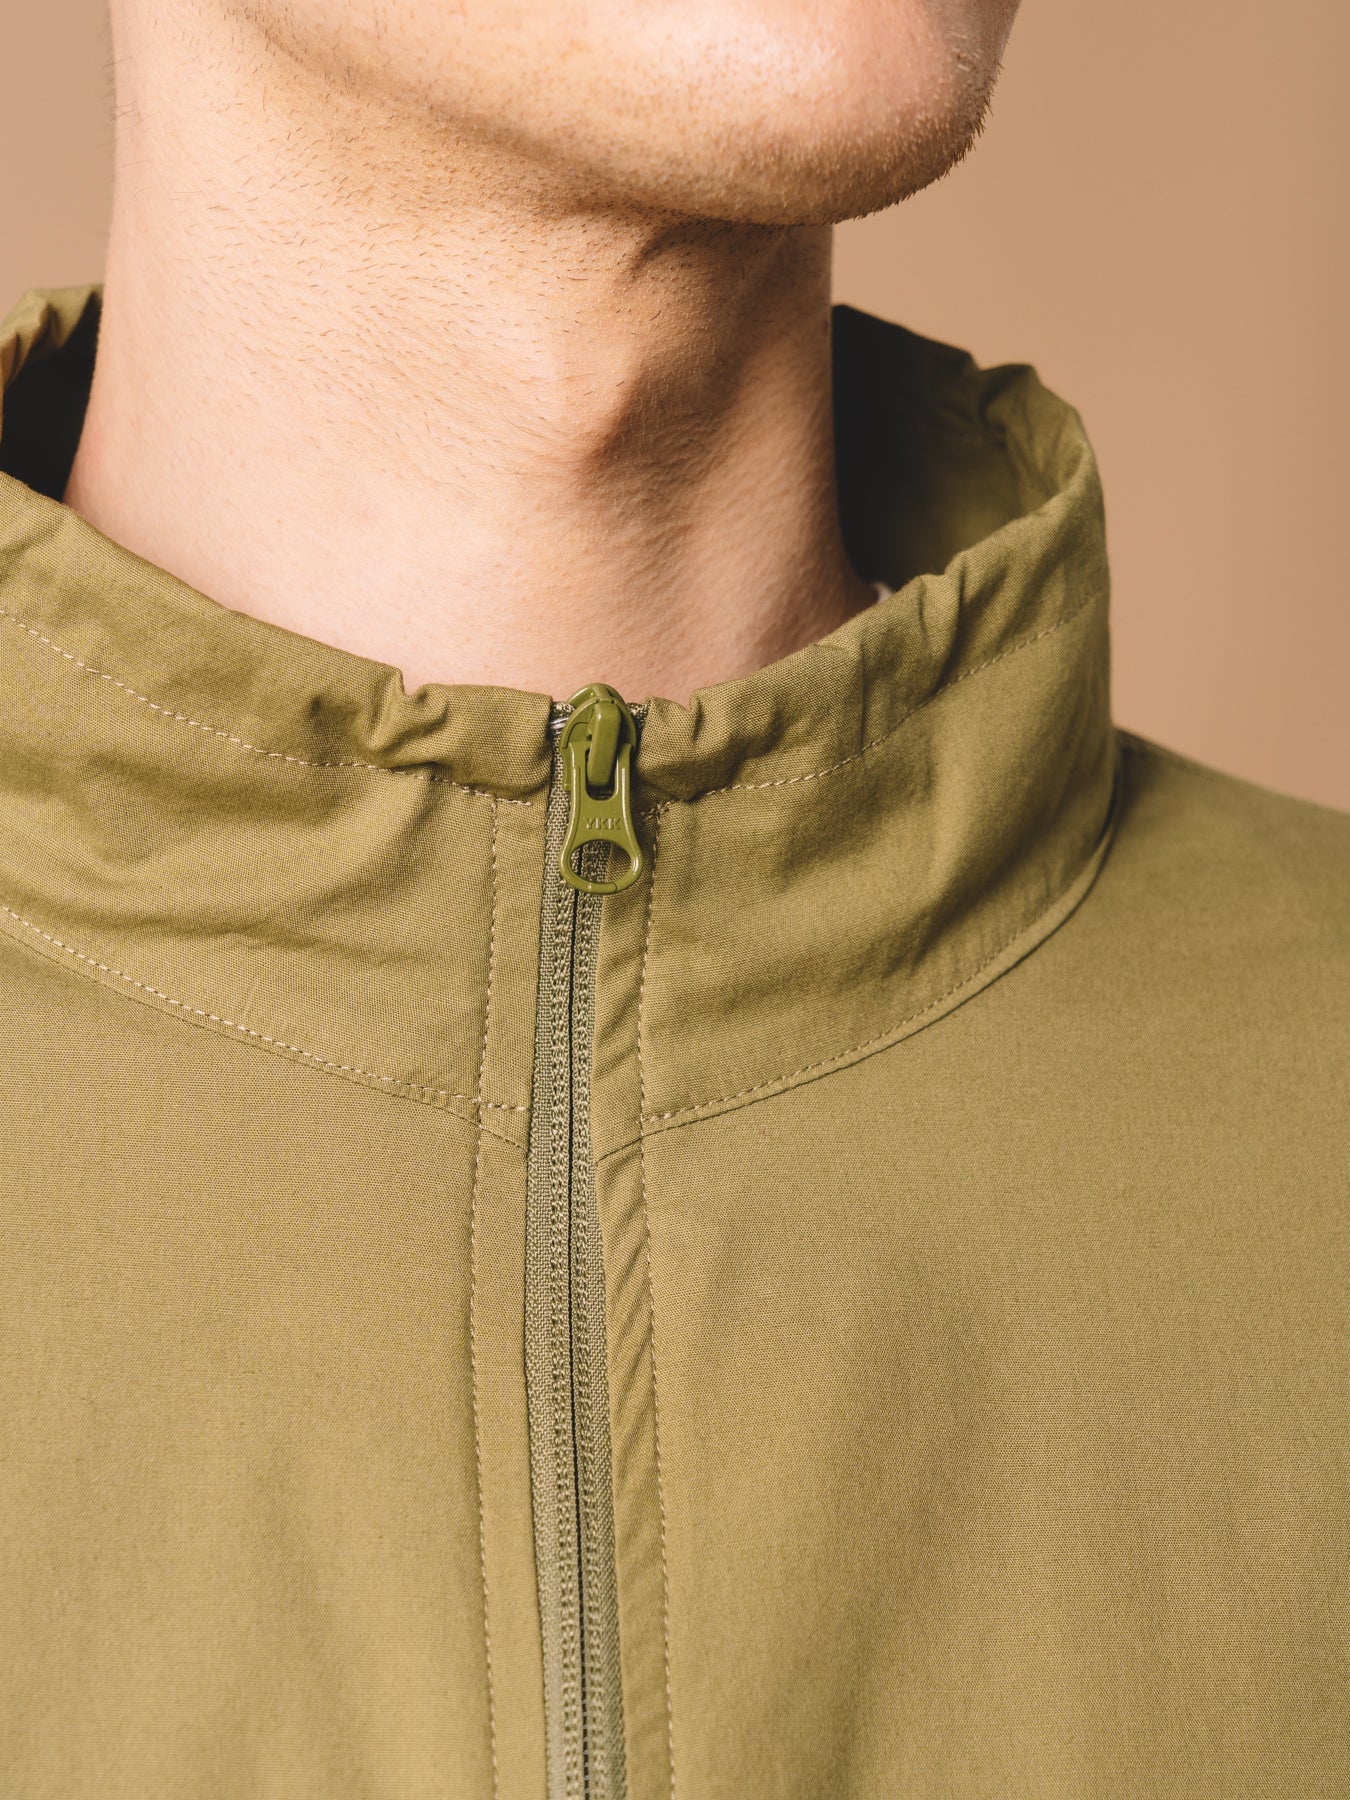 A zippered neck from the KESTIN Crieff Windbreaker in Military Green.